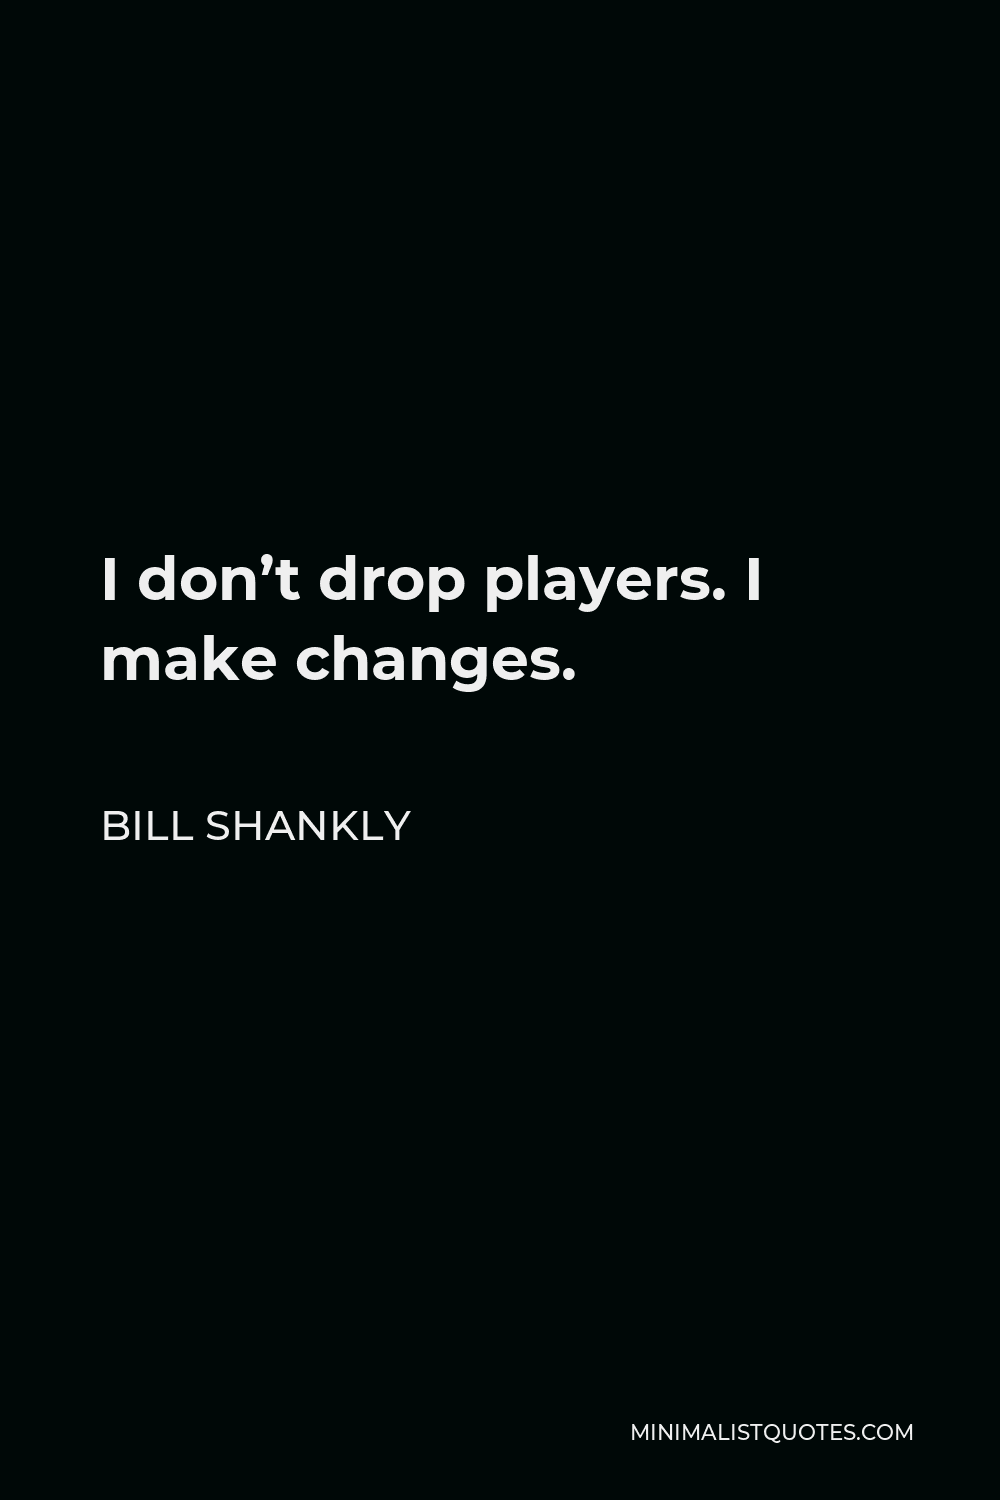 Bill Shankly Quote - I don’t drop players. I make changes.